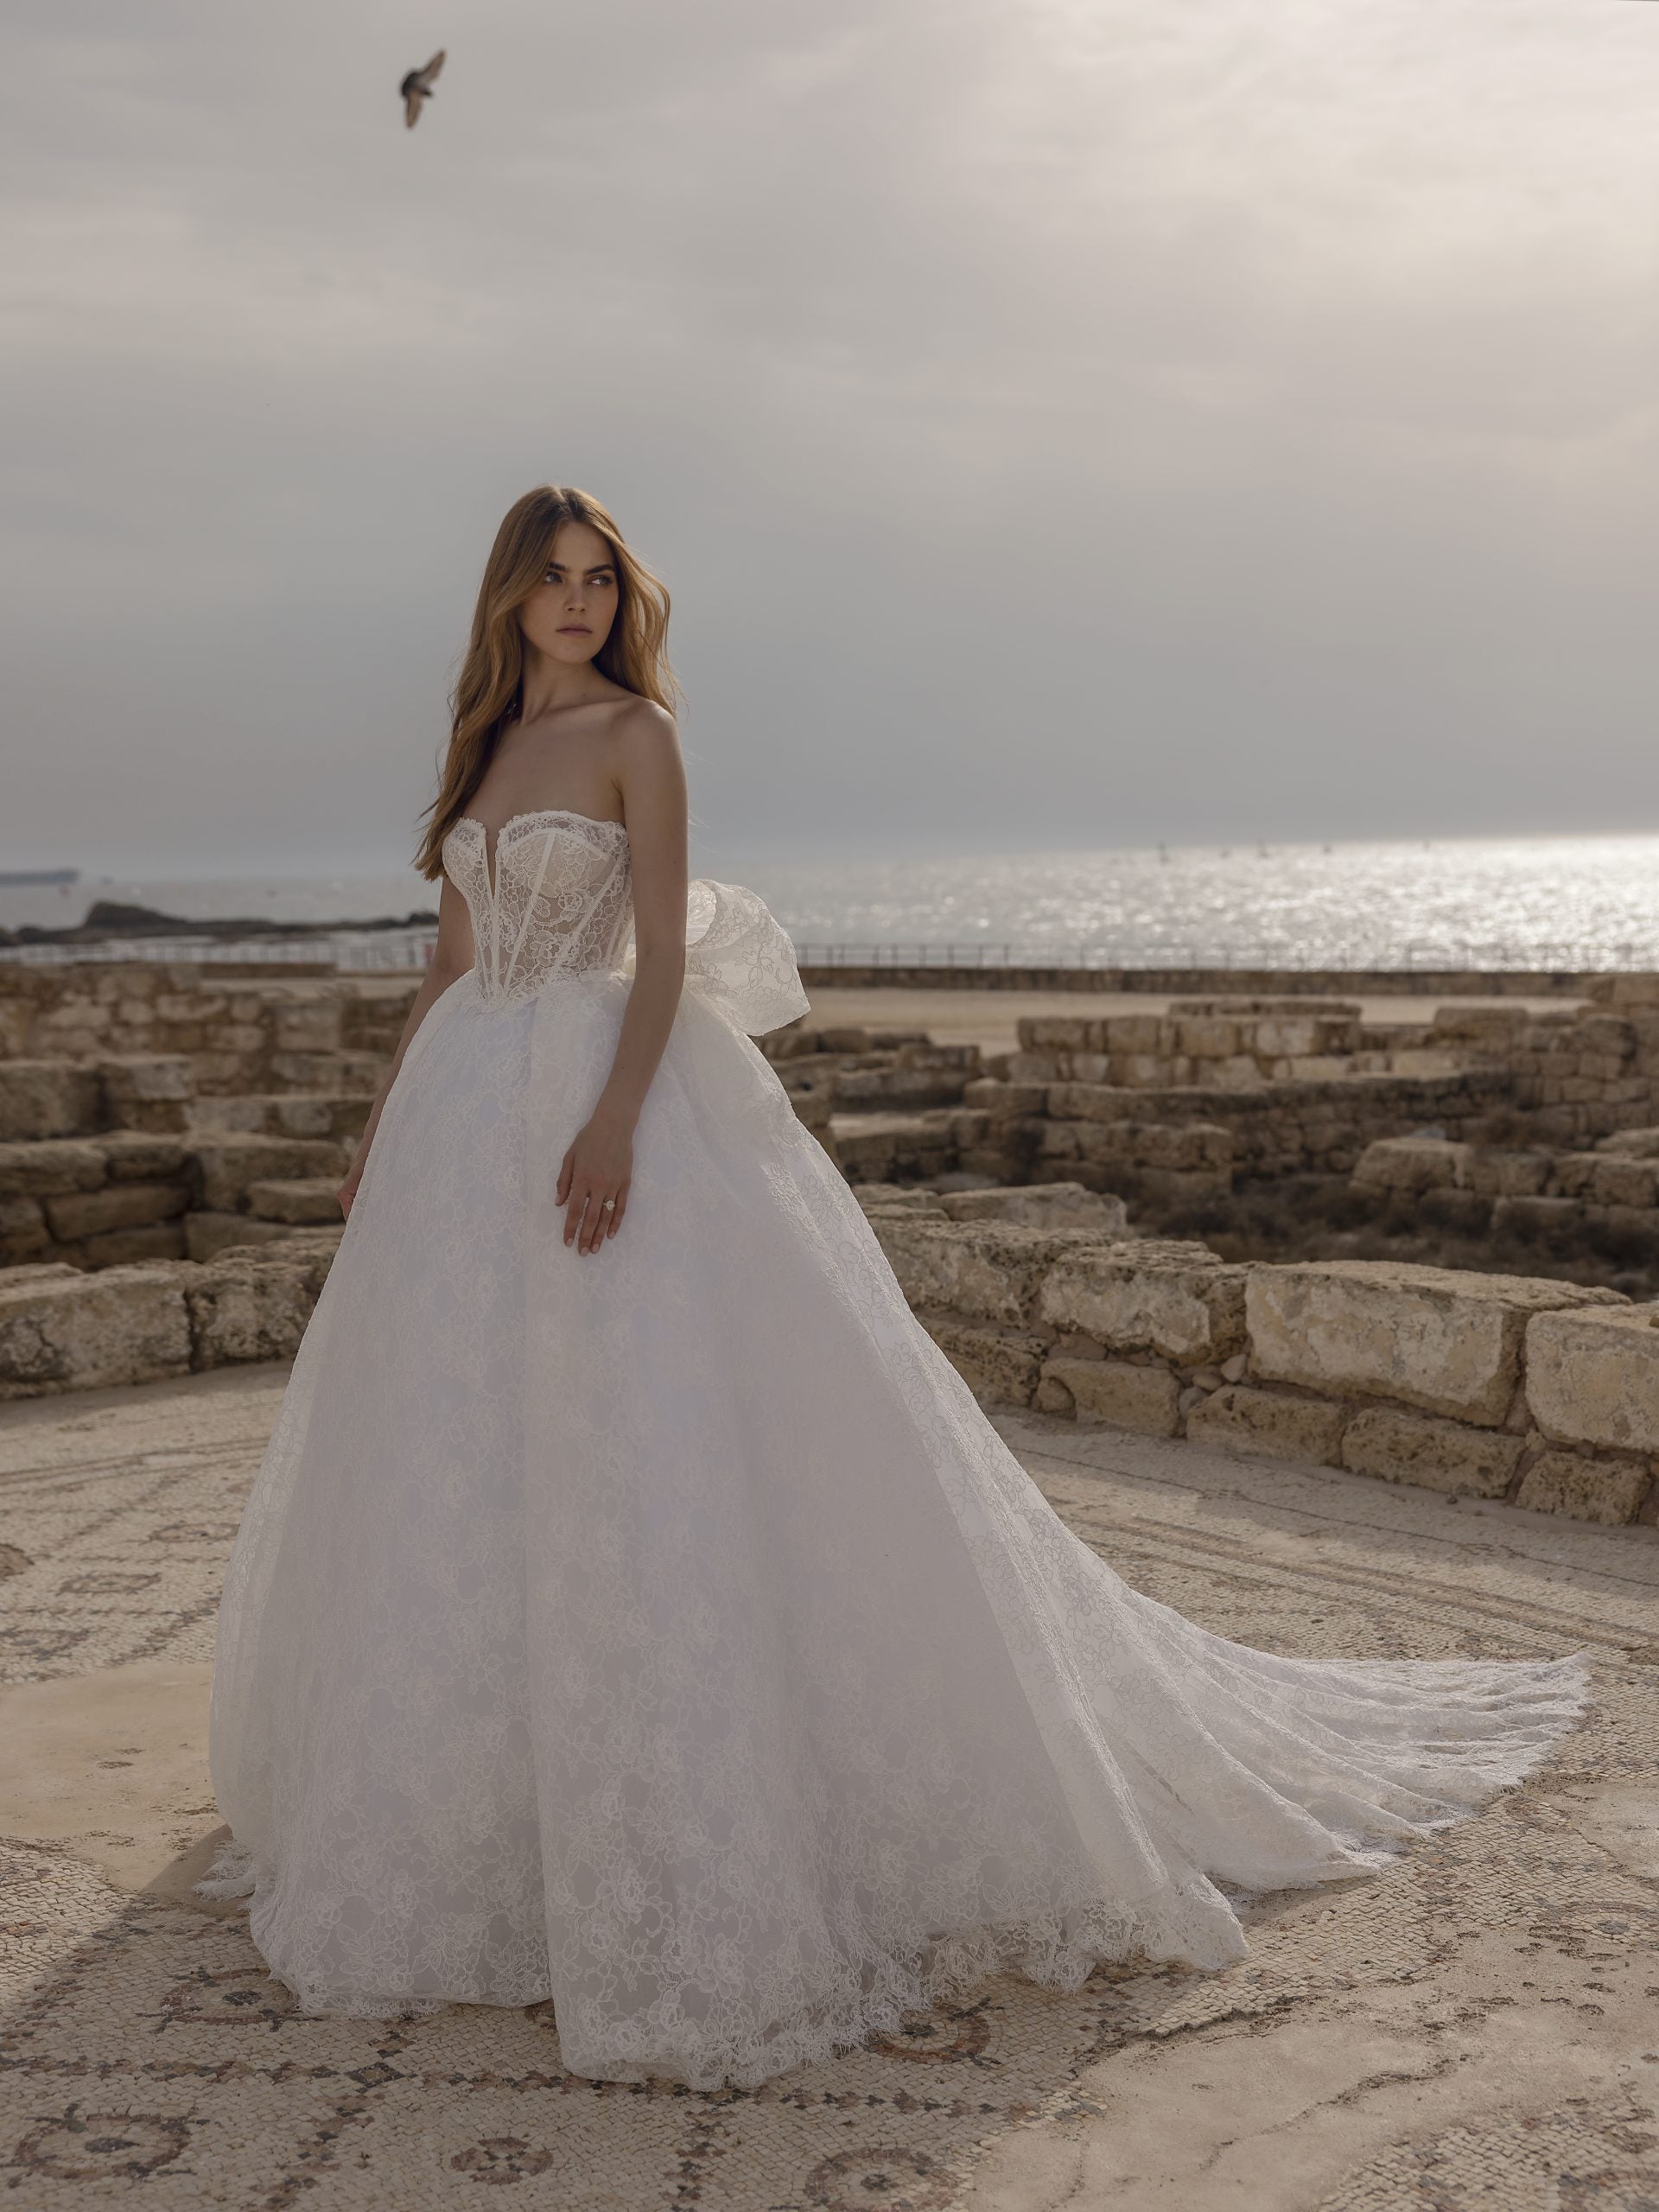 Lace Strapless Ball Gown Wedding Dress With Bow by Love by Pnina Tornai - Image 1